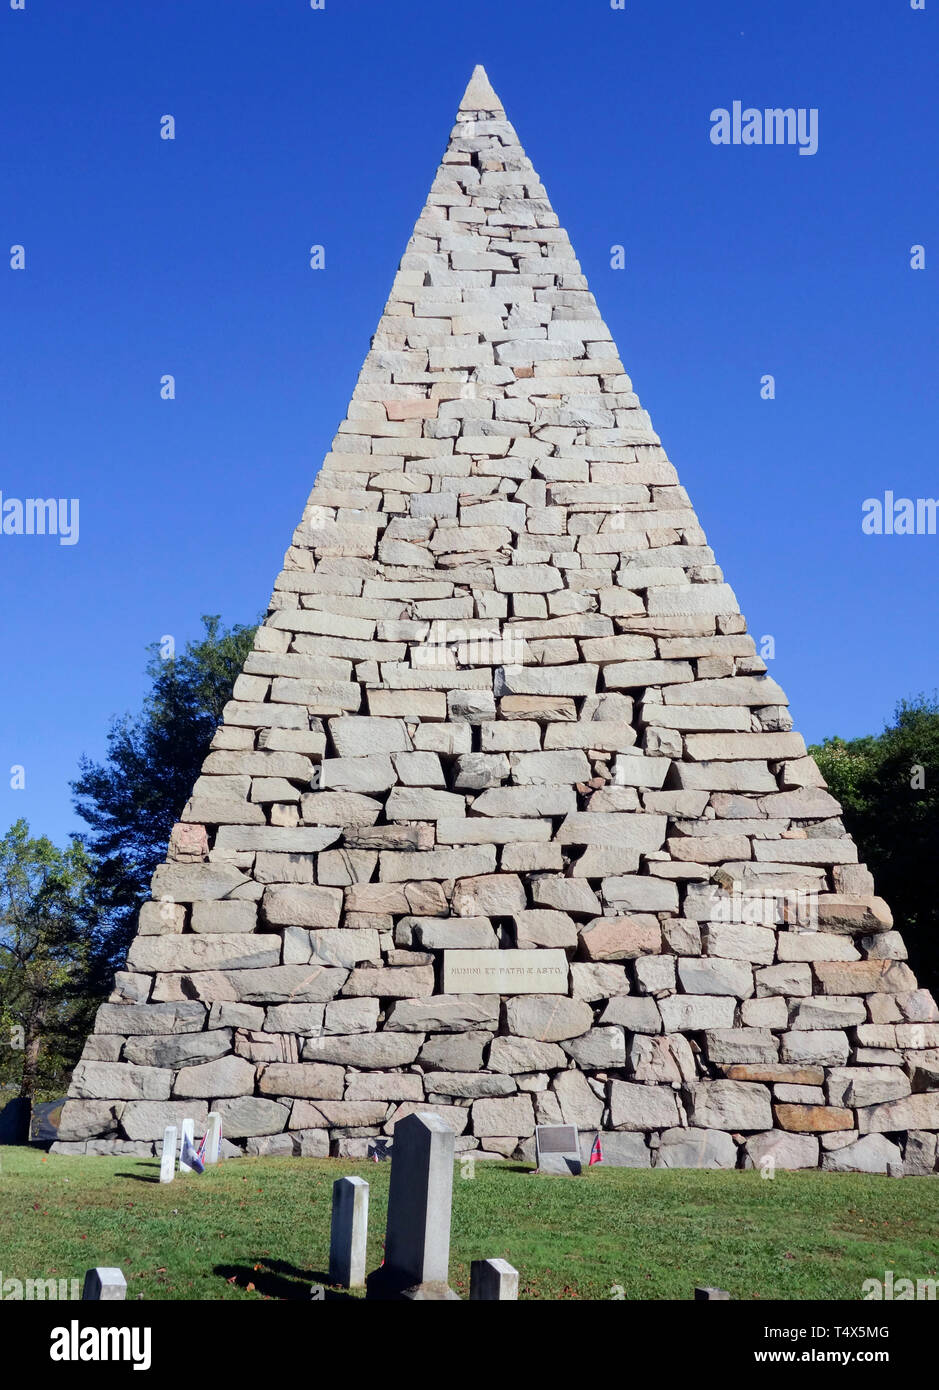 Pyramid memorial to Confederate Soldiers in Hollywood cemetery, Richmond, Virginia, US, 2017. Stock Photo